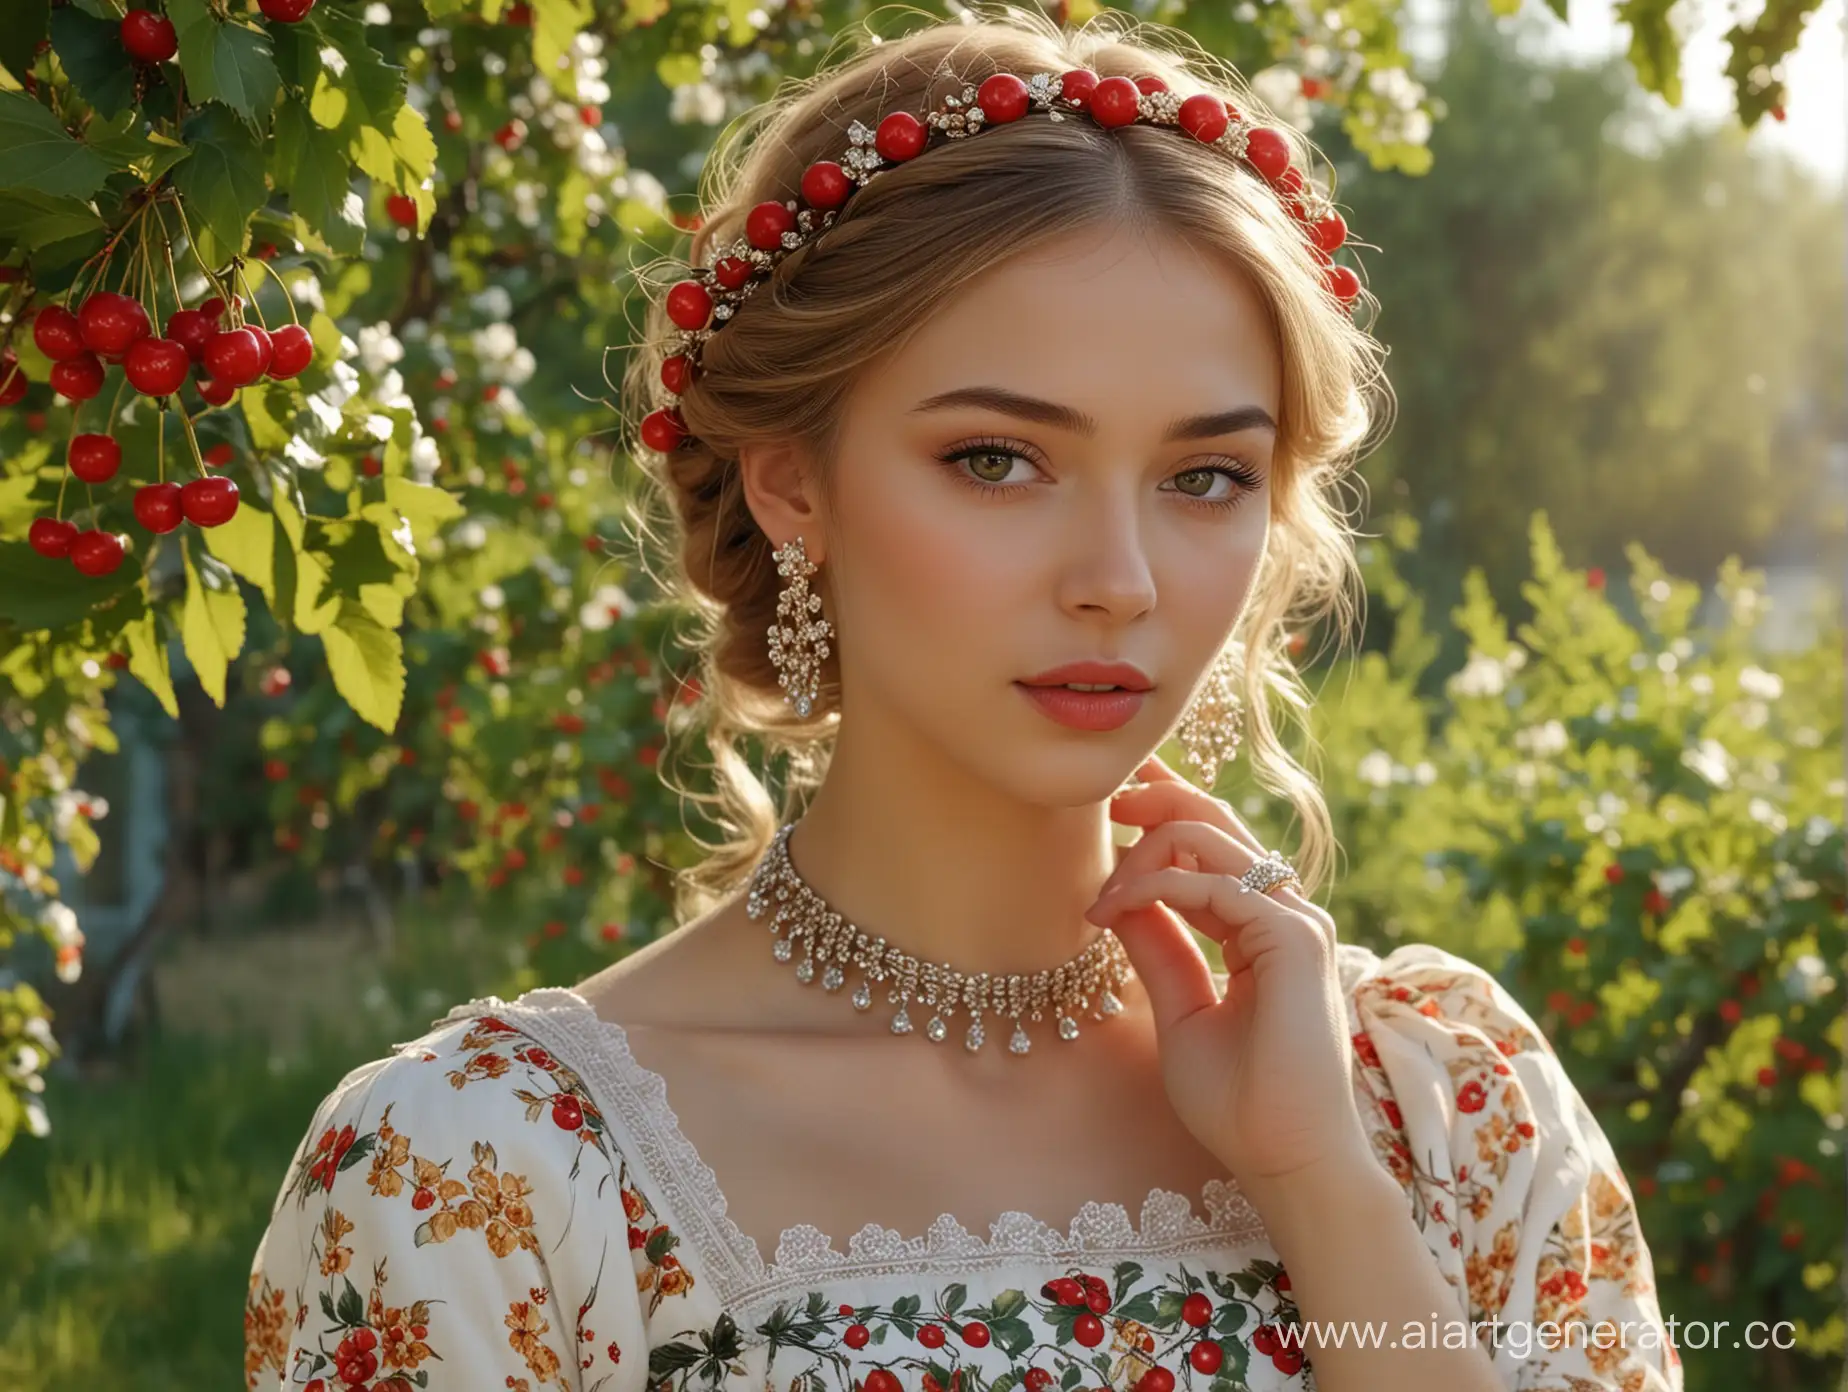 Russian-Girl-in-Floral-Sundress-with-Kokoshnik-and-Jewelry-in-Cherry-Orchard